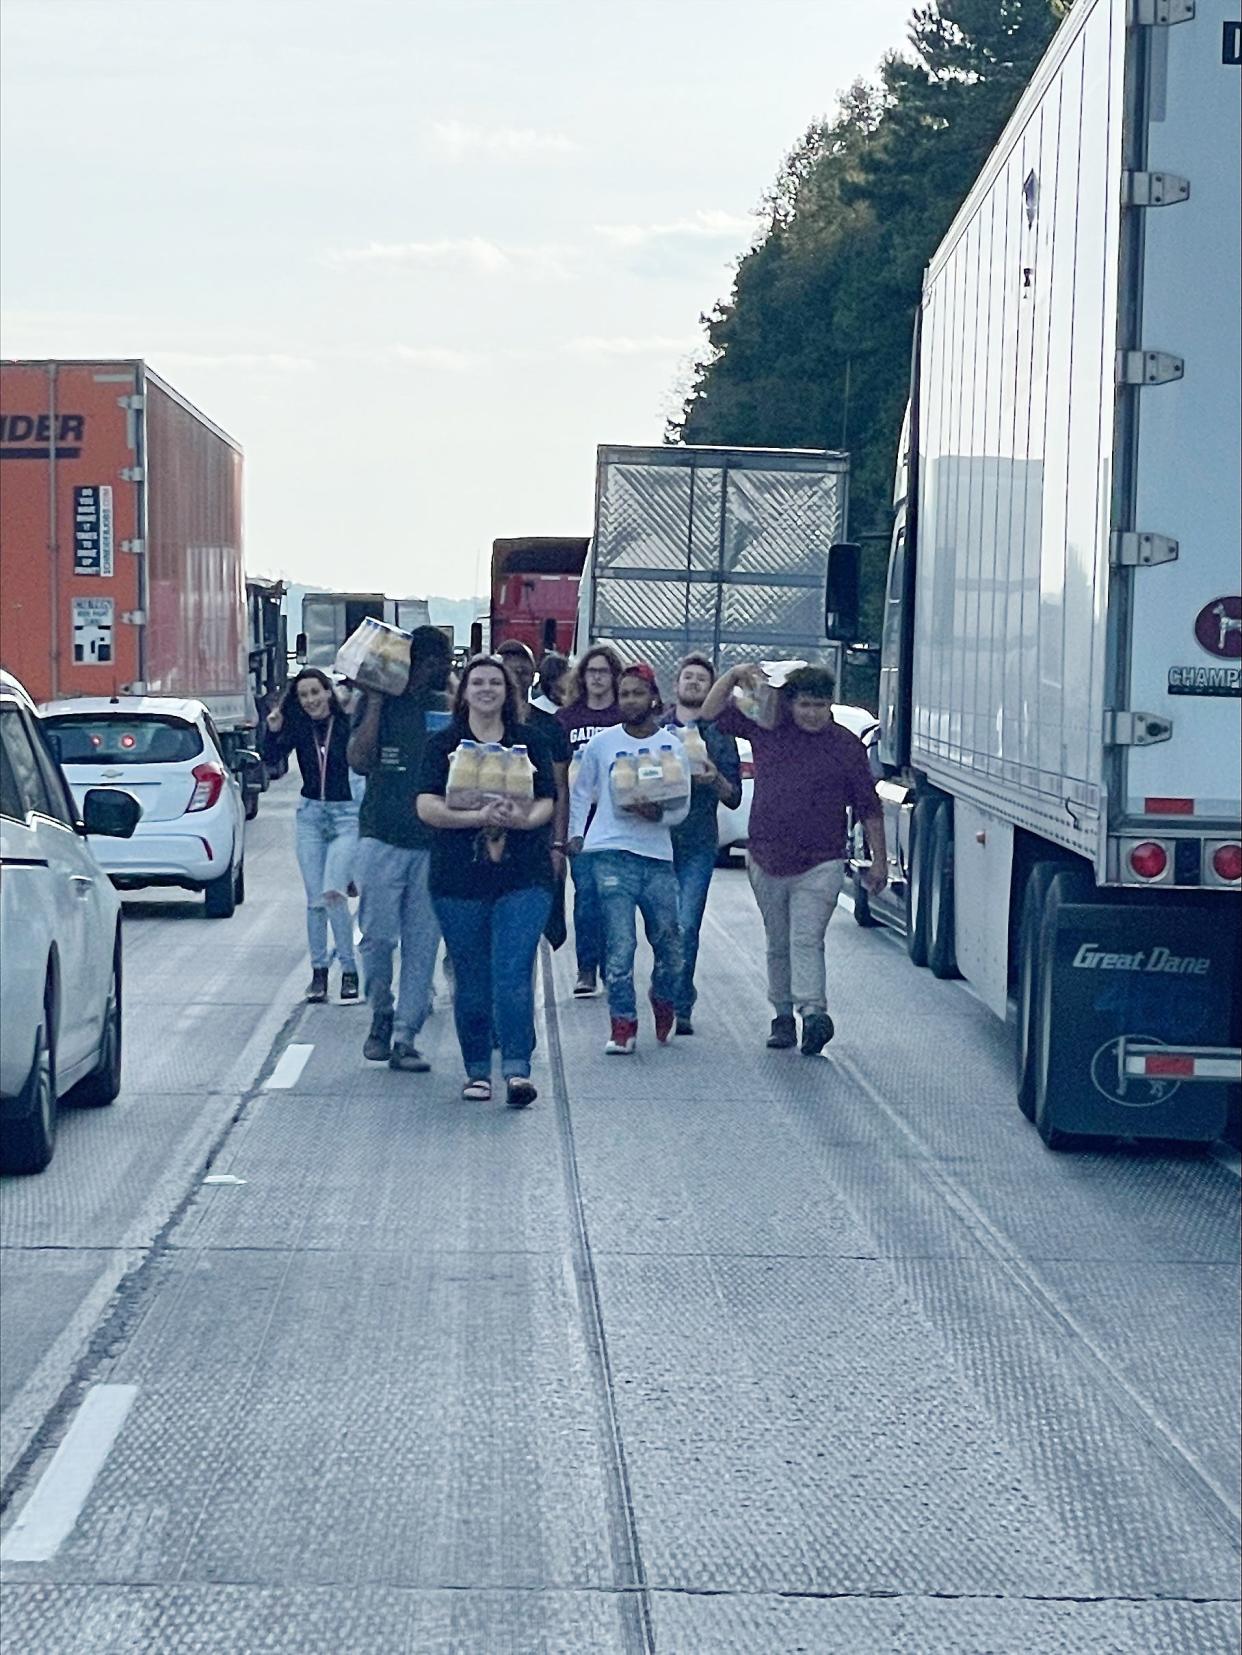 Members of the Gadsden State Community College Show Band are pictured walking down Interstate 59 on Oct. 14 after being snarled in a traffic jam. Some of those students in the GSCC group, which was headed to a clinic and concert in Birmingham, helped distribute orange juice to others caught in the jam.